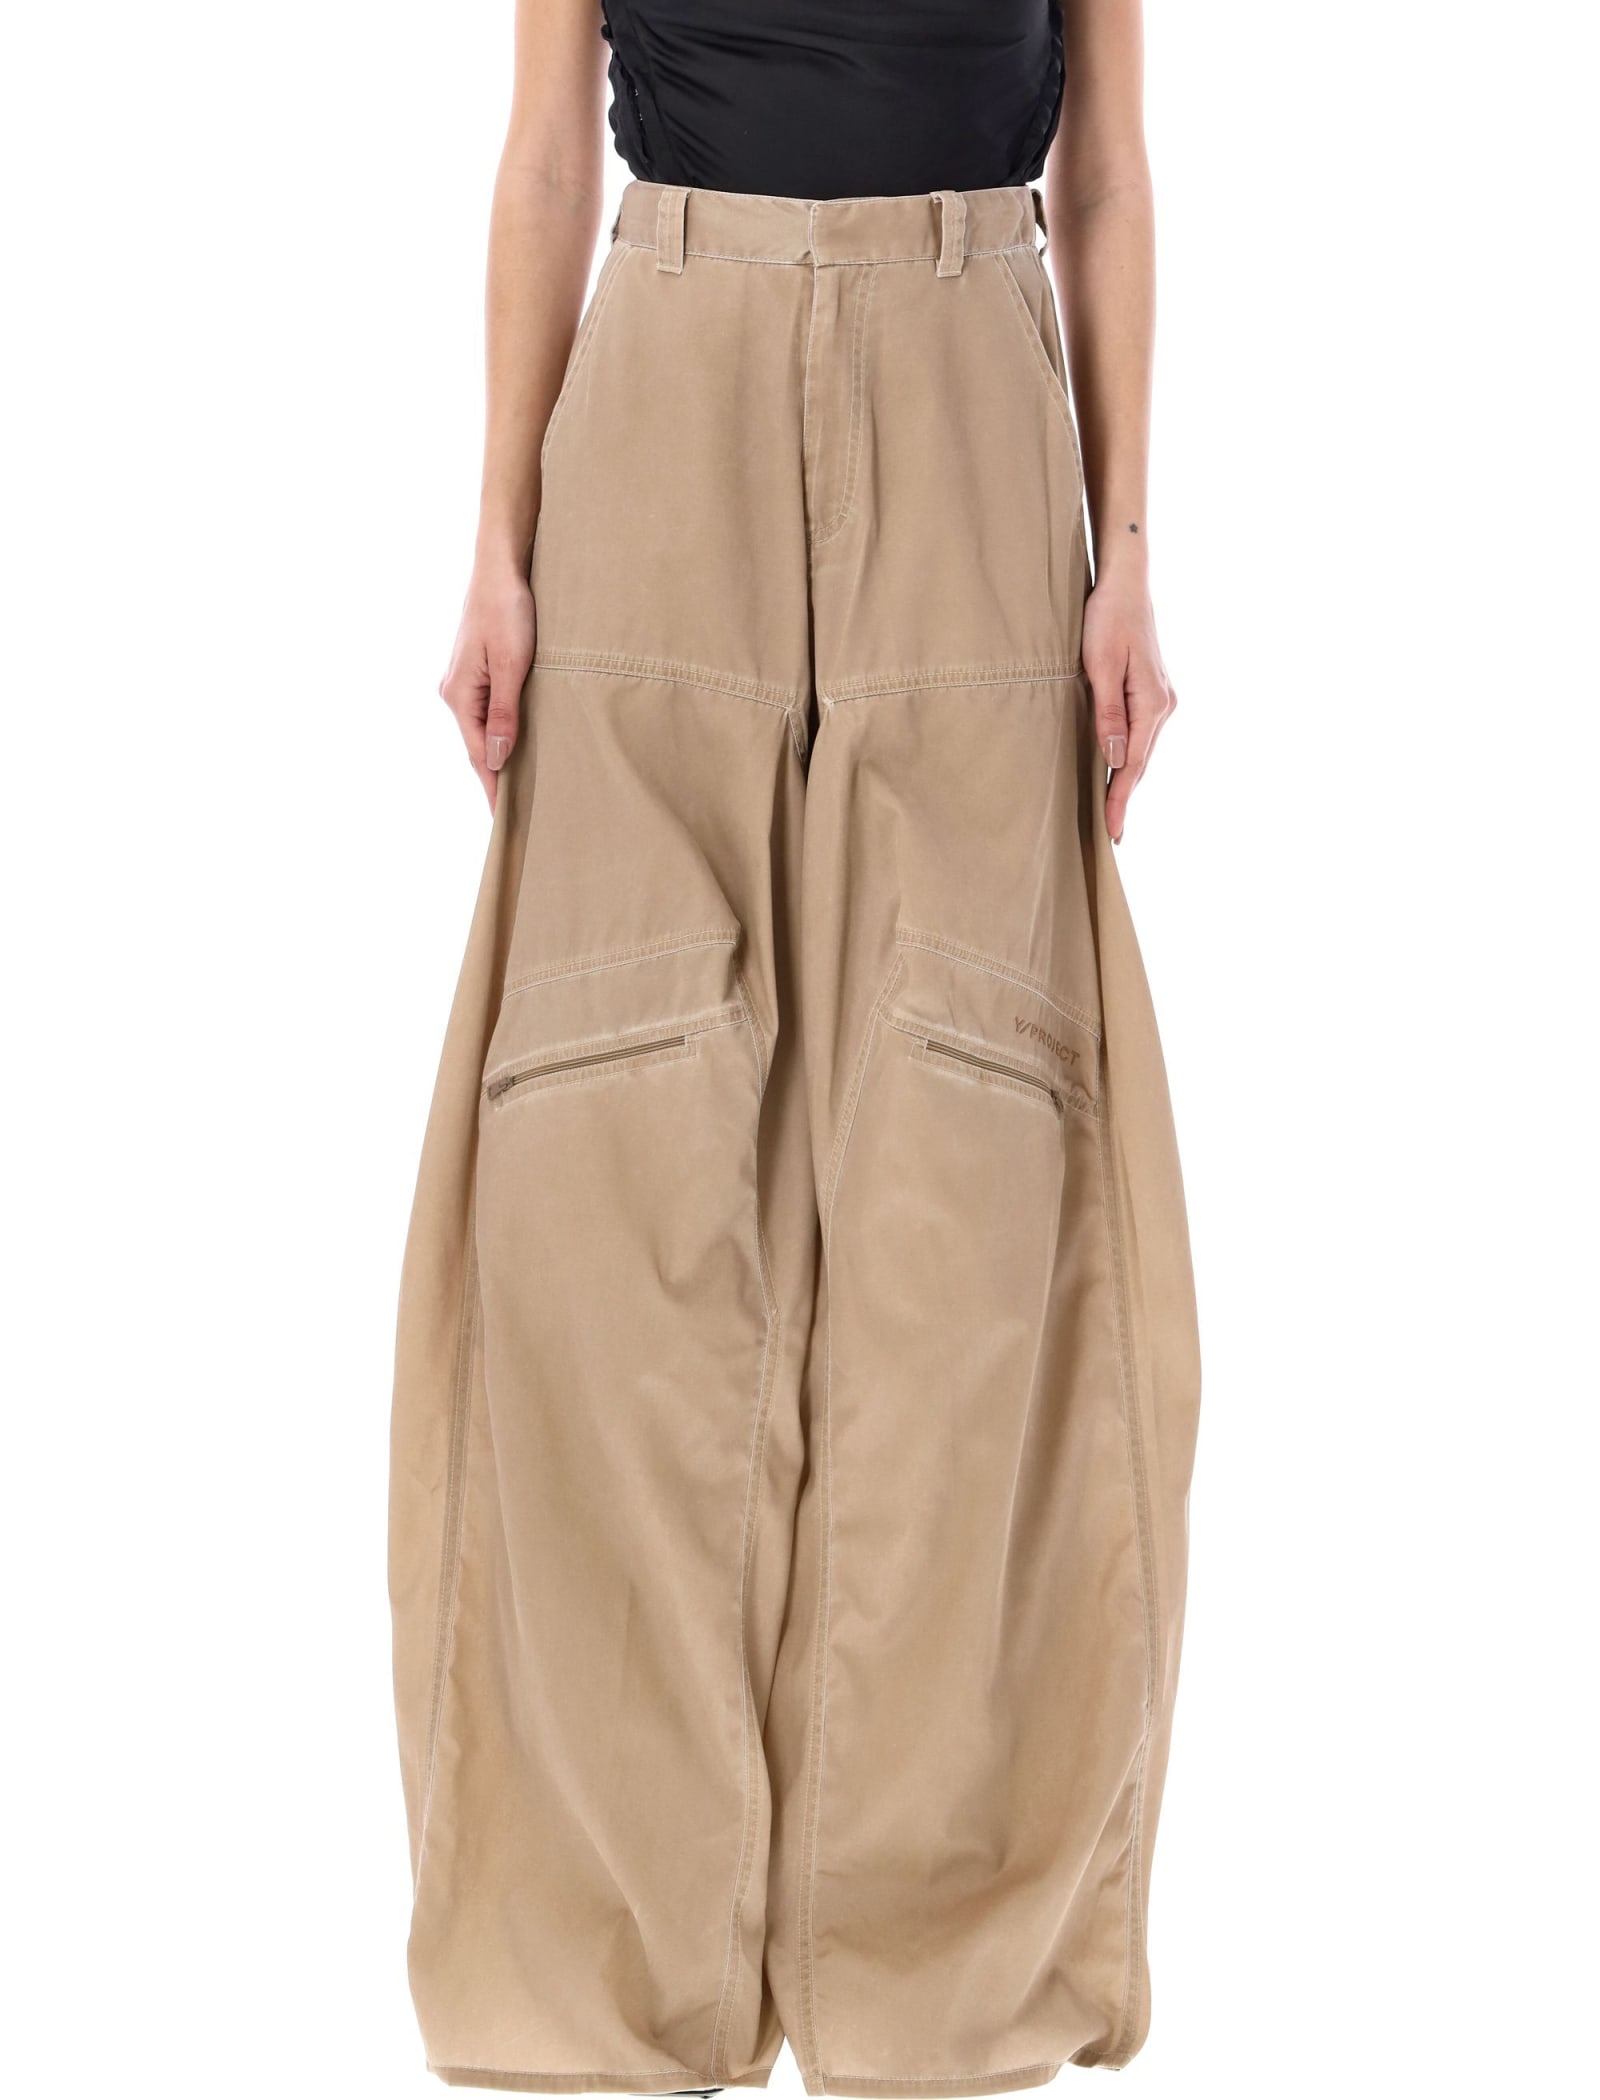 Y/project Washed Pop-up Pant In Washed Beige